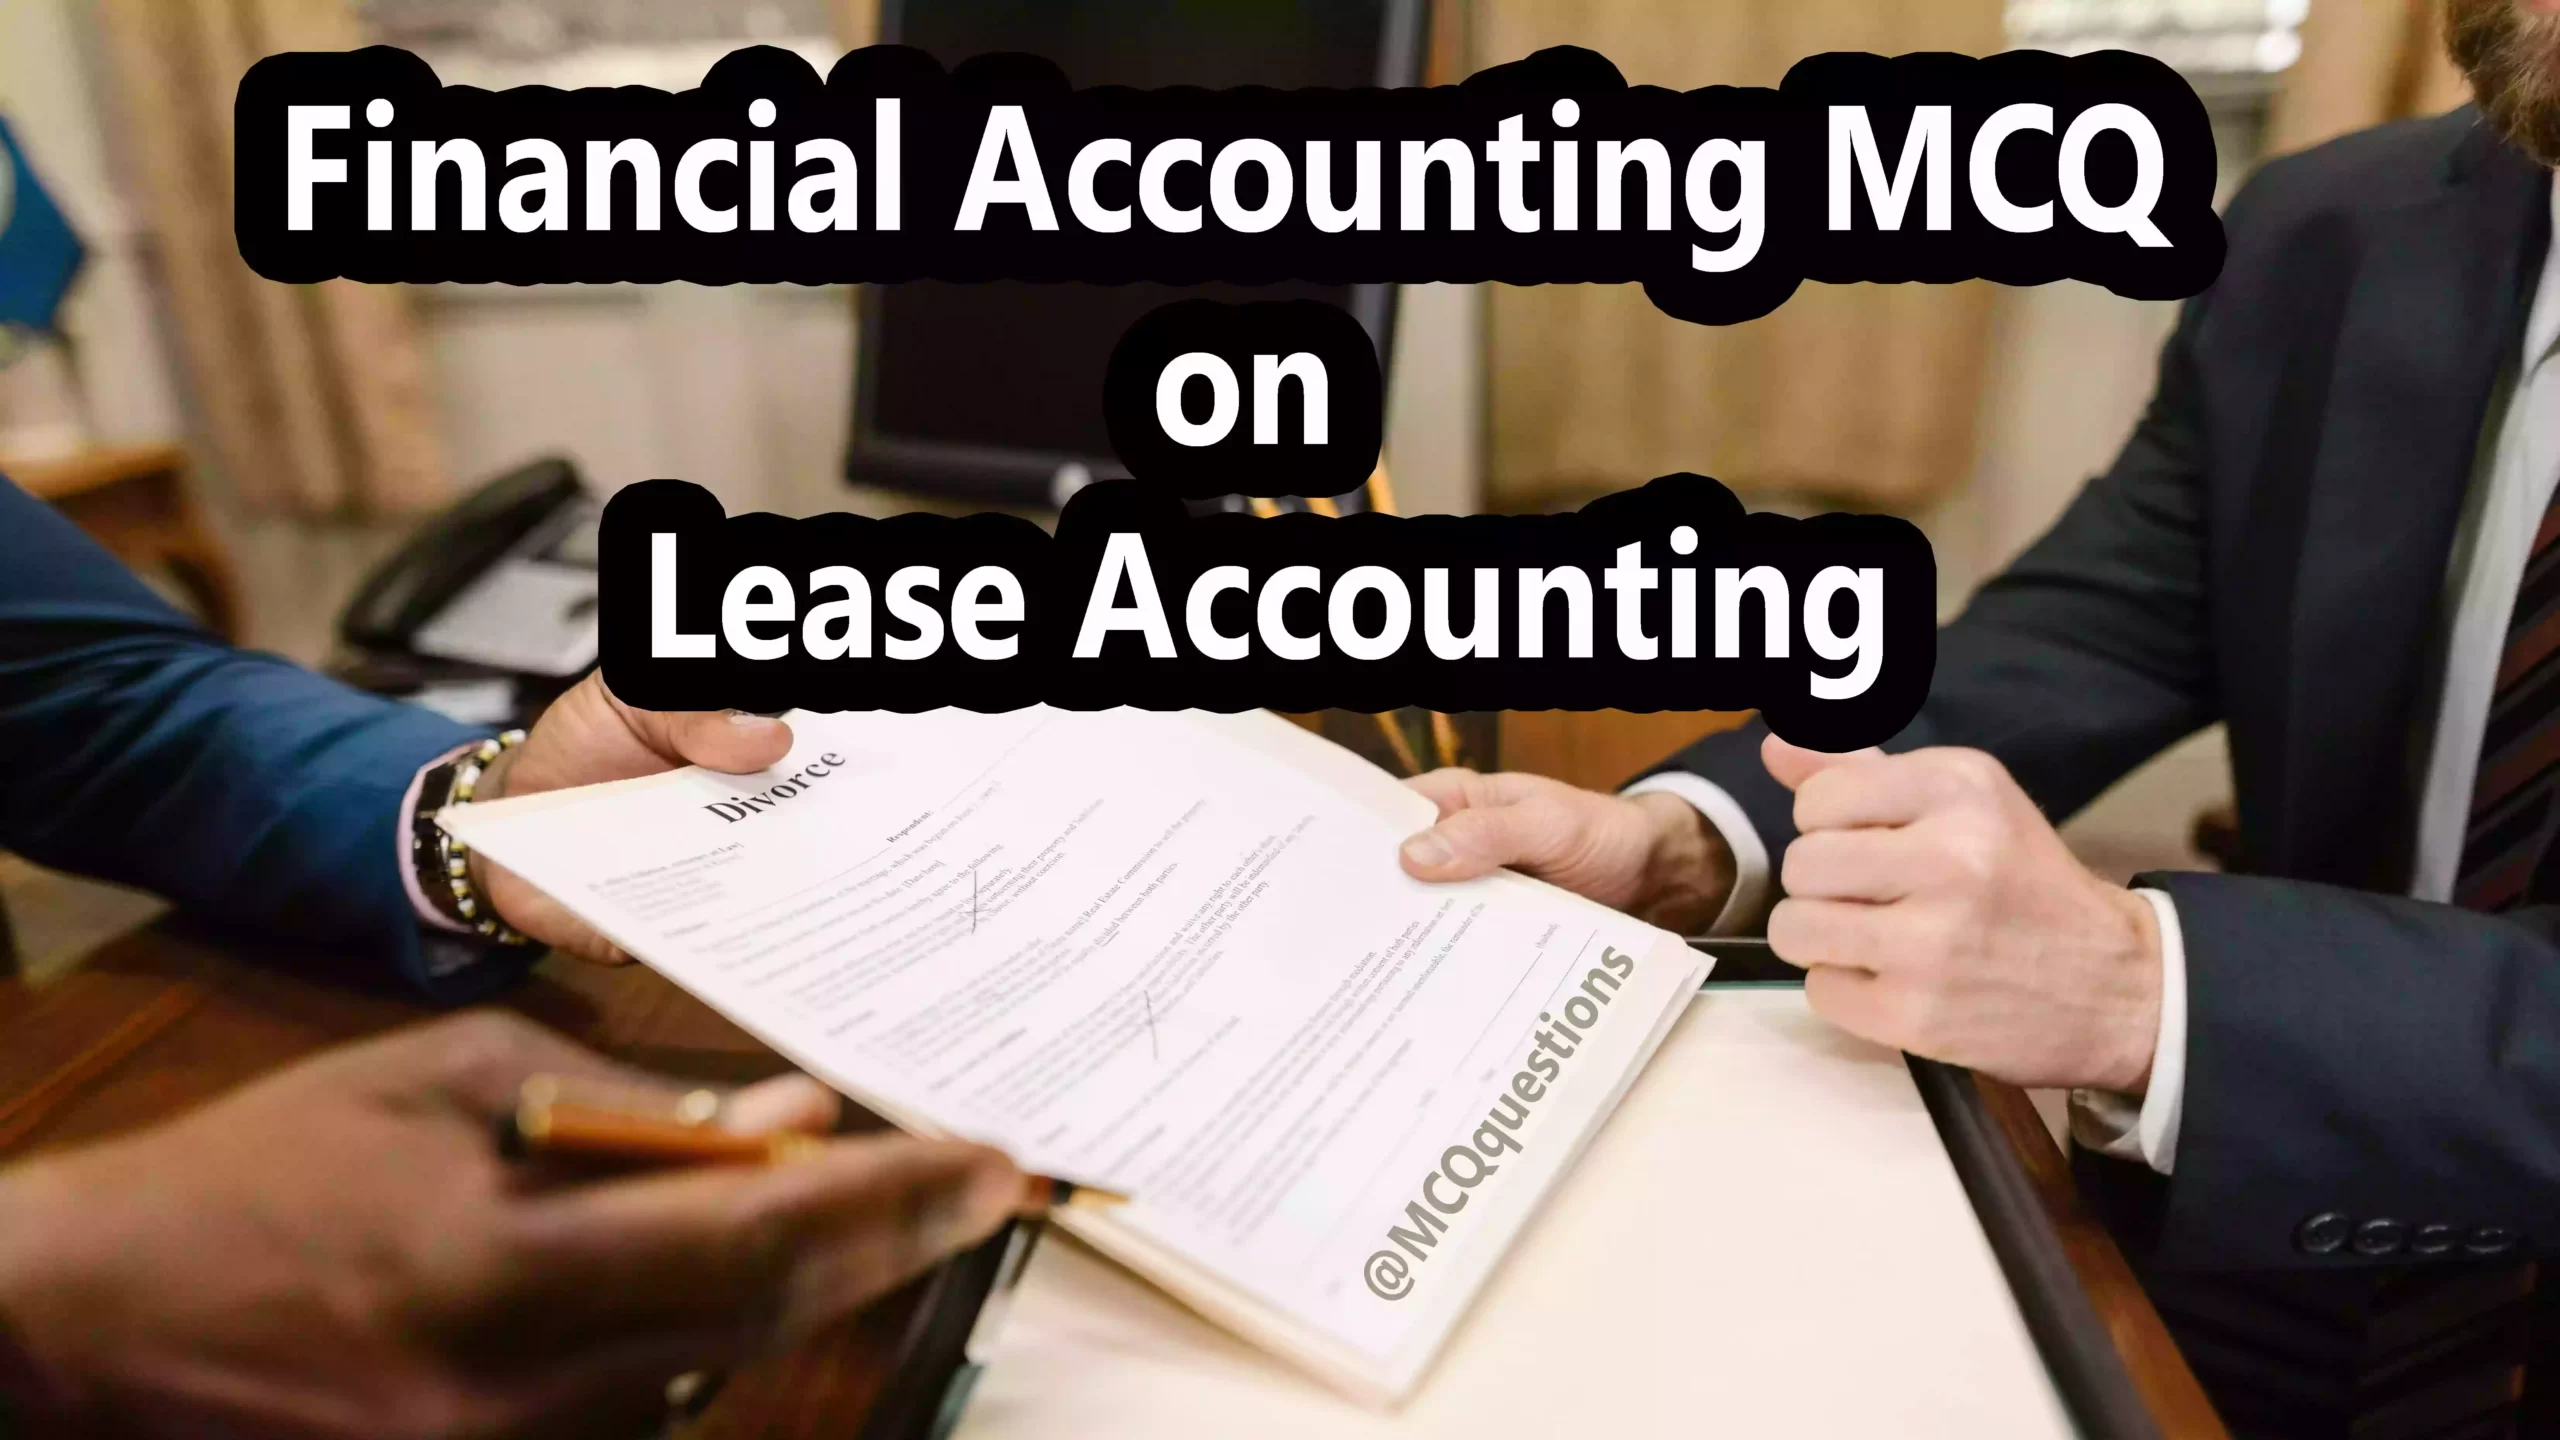 Financial Accounting MCQ on Lease Accounting